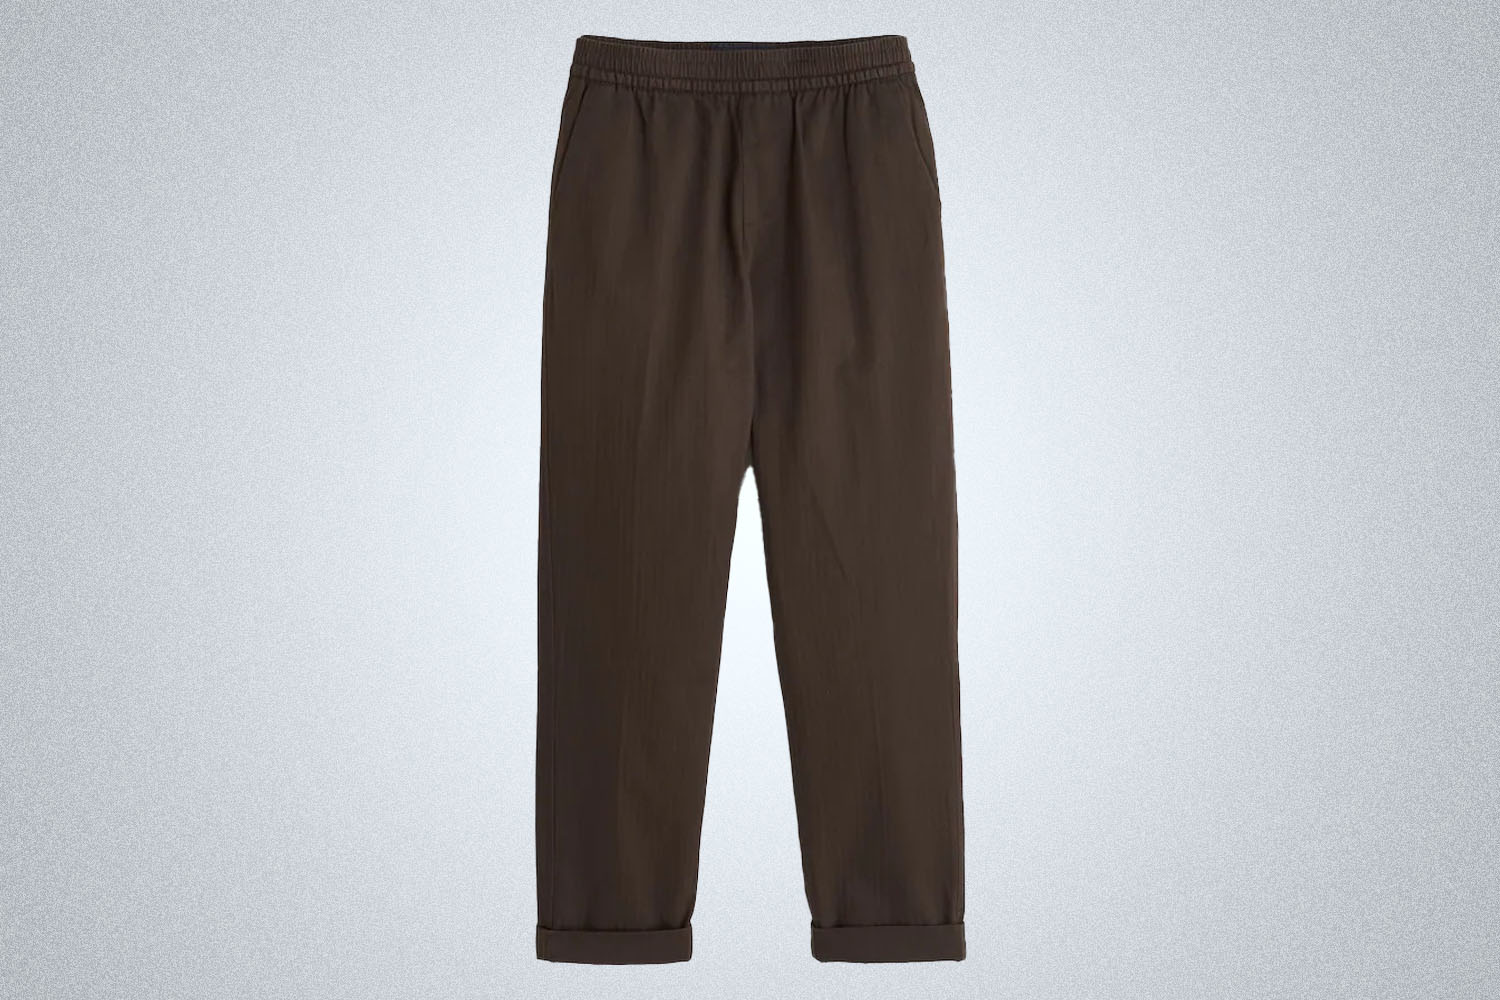 a pair of relaxed brown pull-on pants from Abercrombie on a grey background